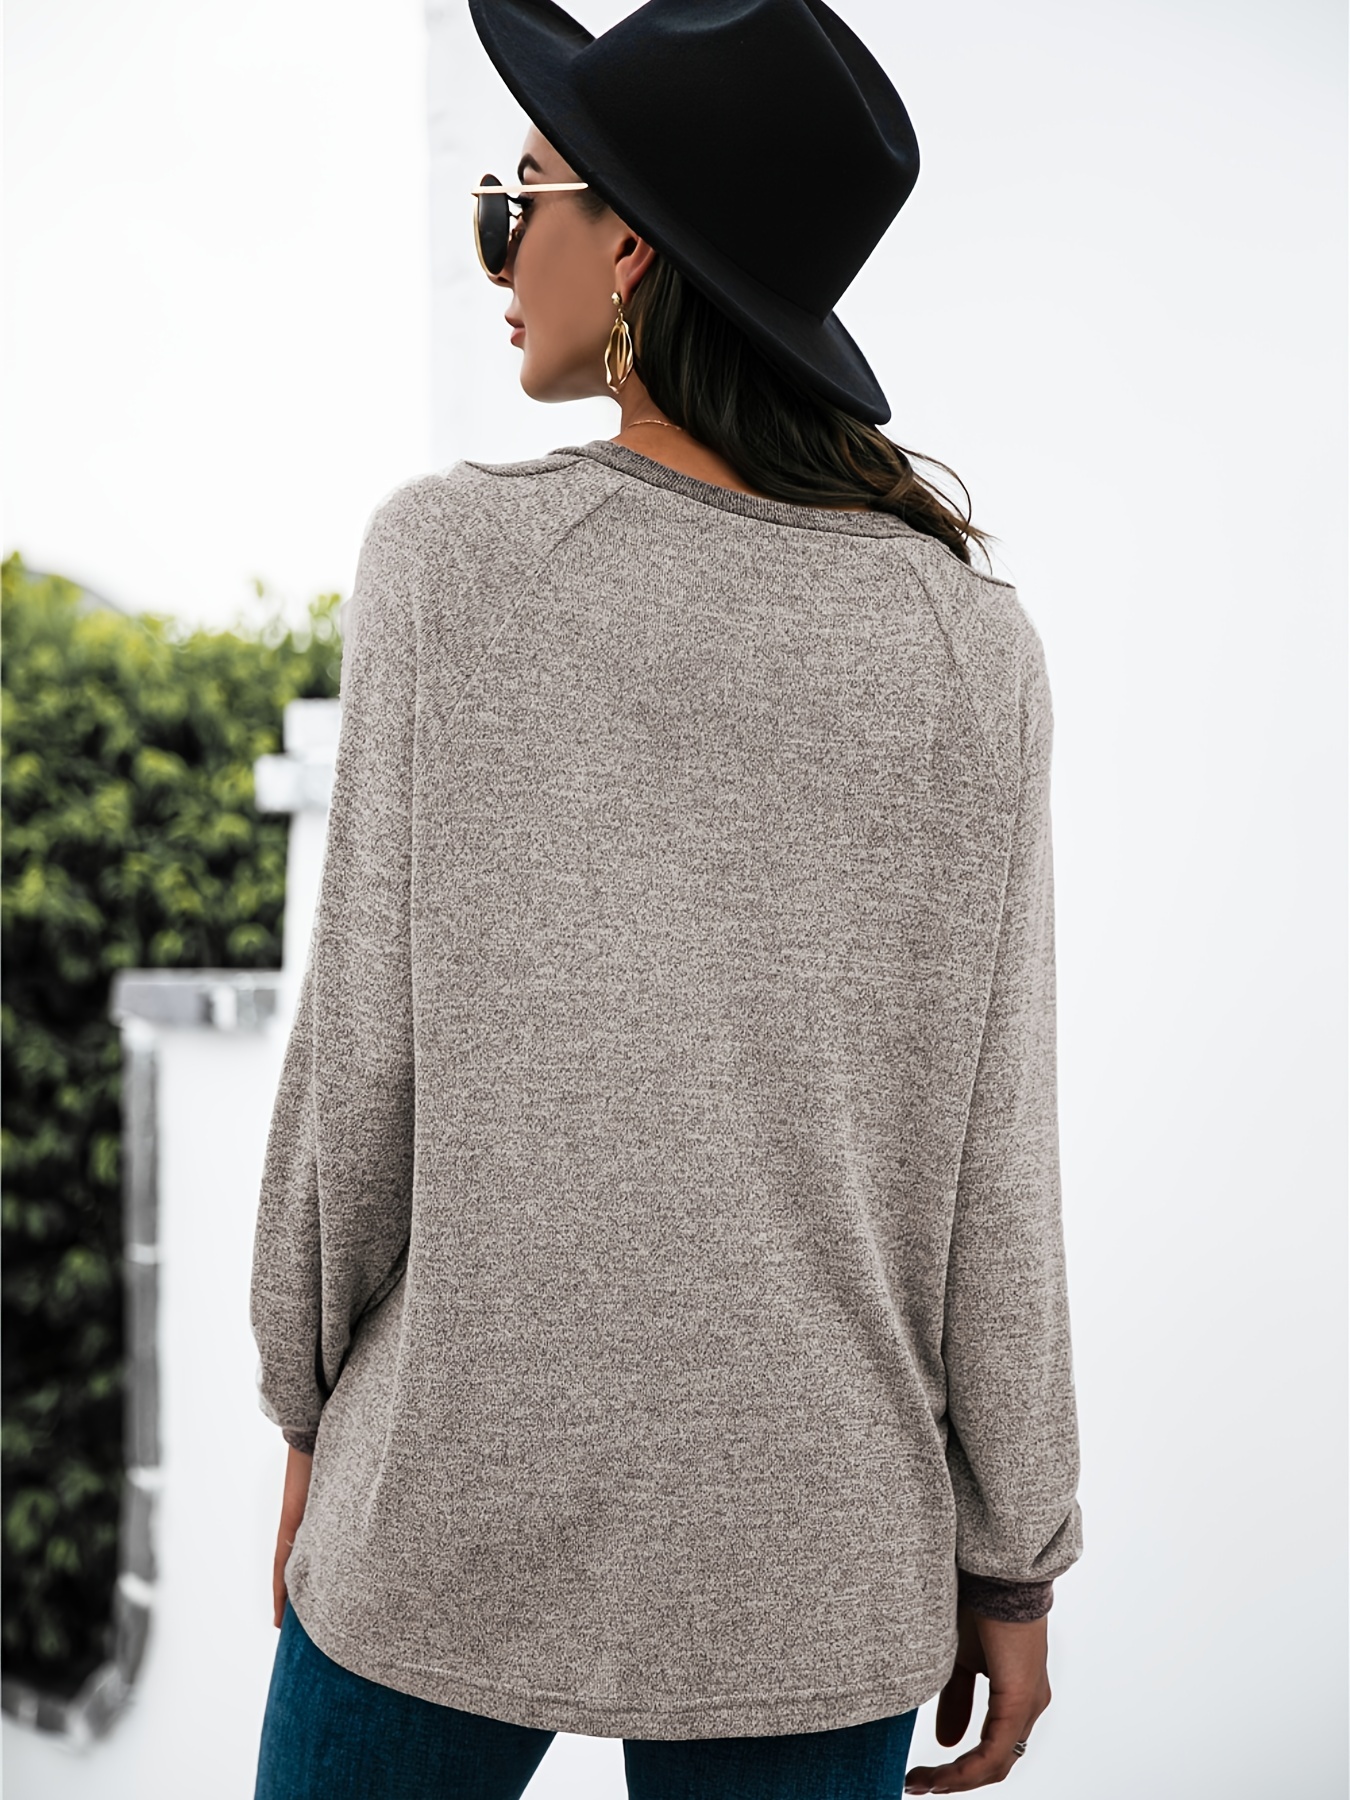 Round Neck Long Sleeve Stitch Color T-shirt, Casual Loose Comfy Stylish  Every Day T-shirt, Women's Clothing